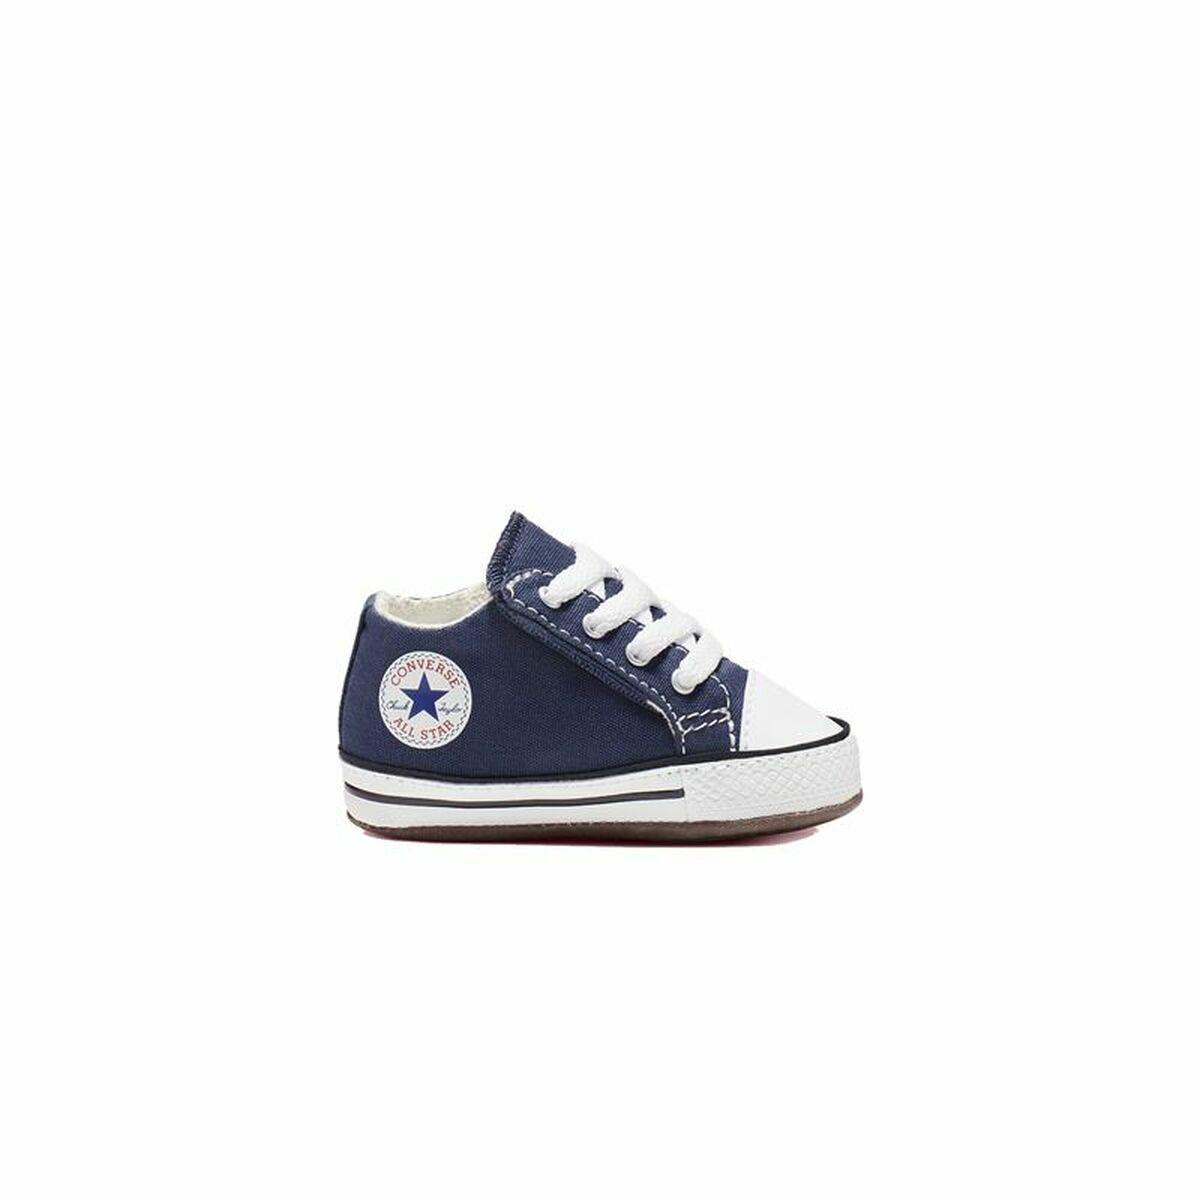 Baby'S Sports Shoes Chuck Taylor Converse Cribster Blue-Toys | Fancy Dress > Babies and Children > Clothes and Footwear for Children-Converse-Urbanheer